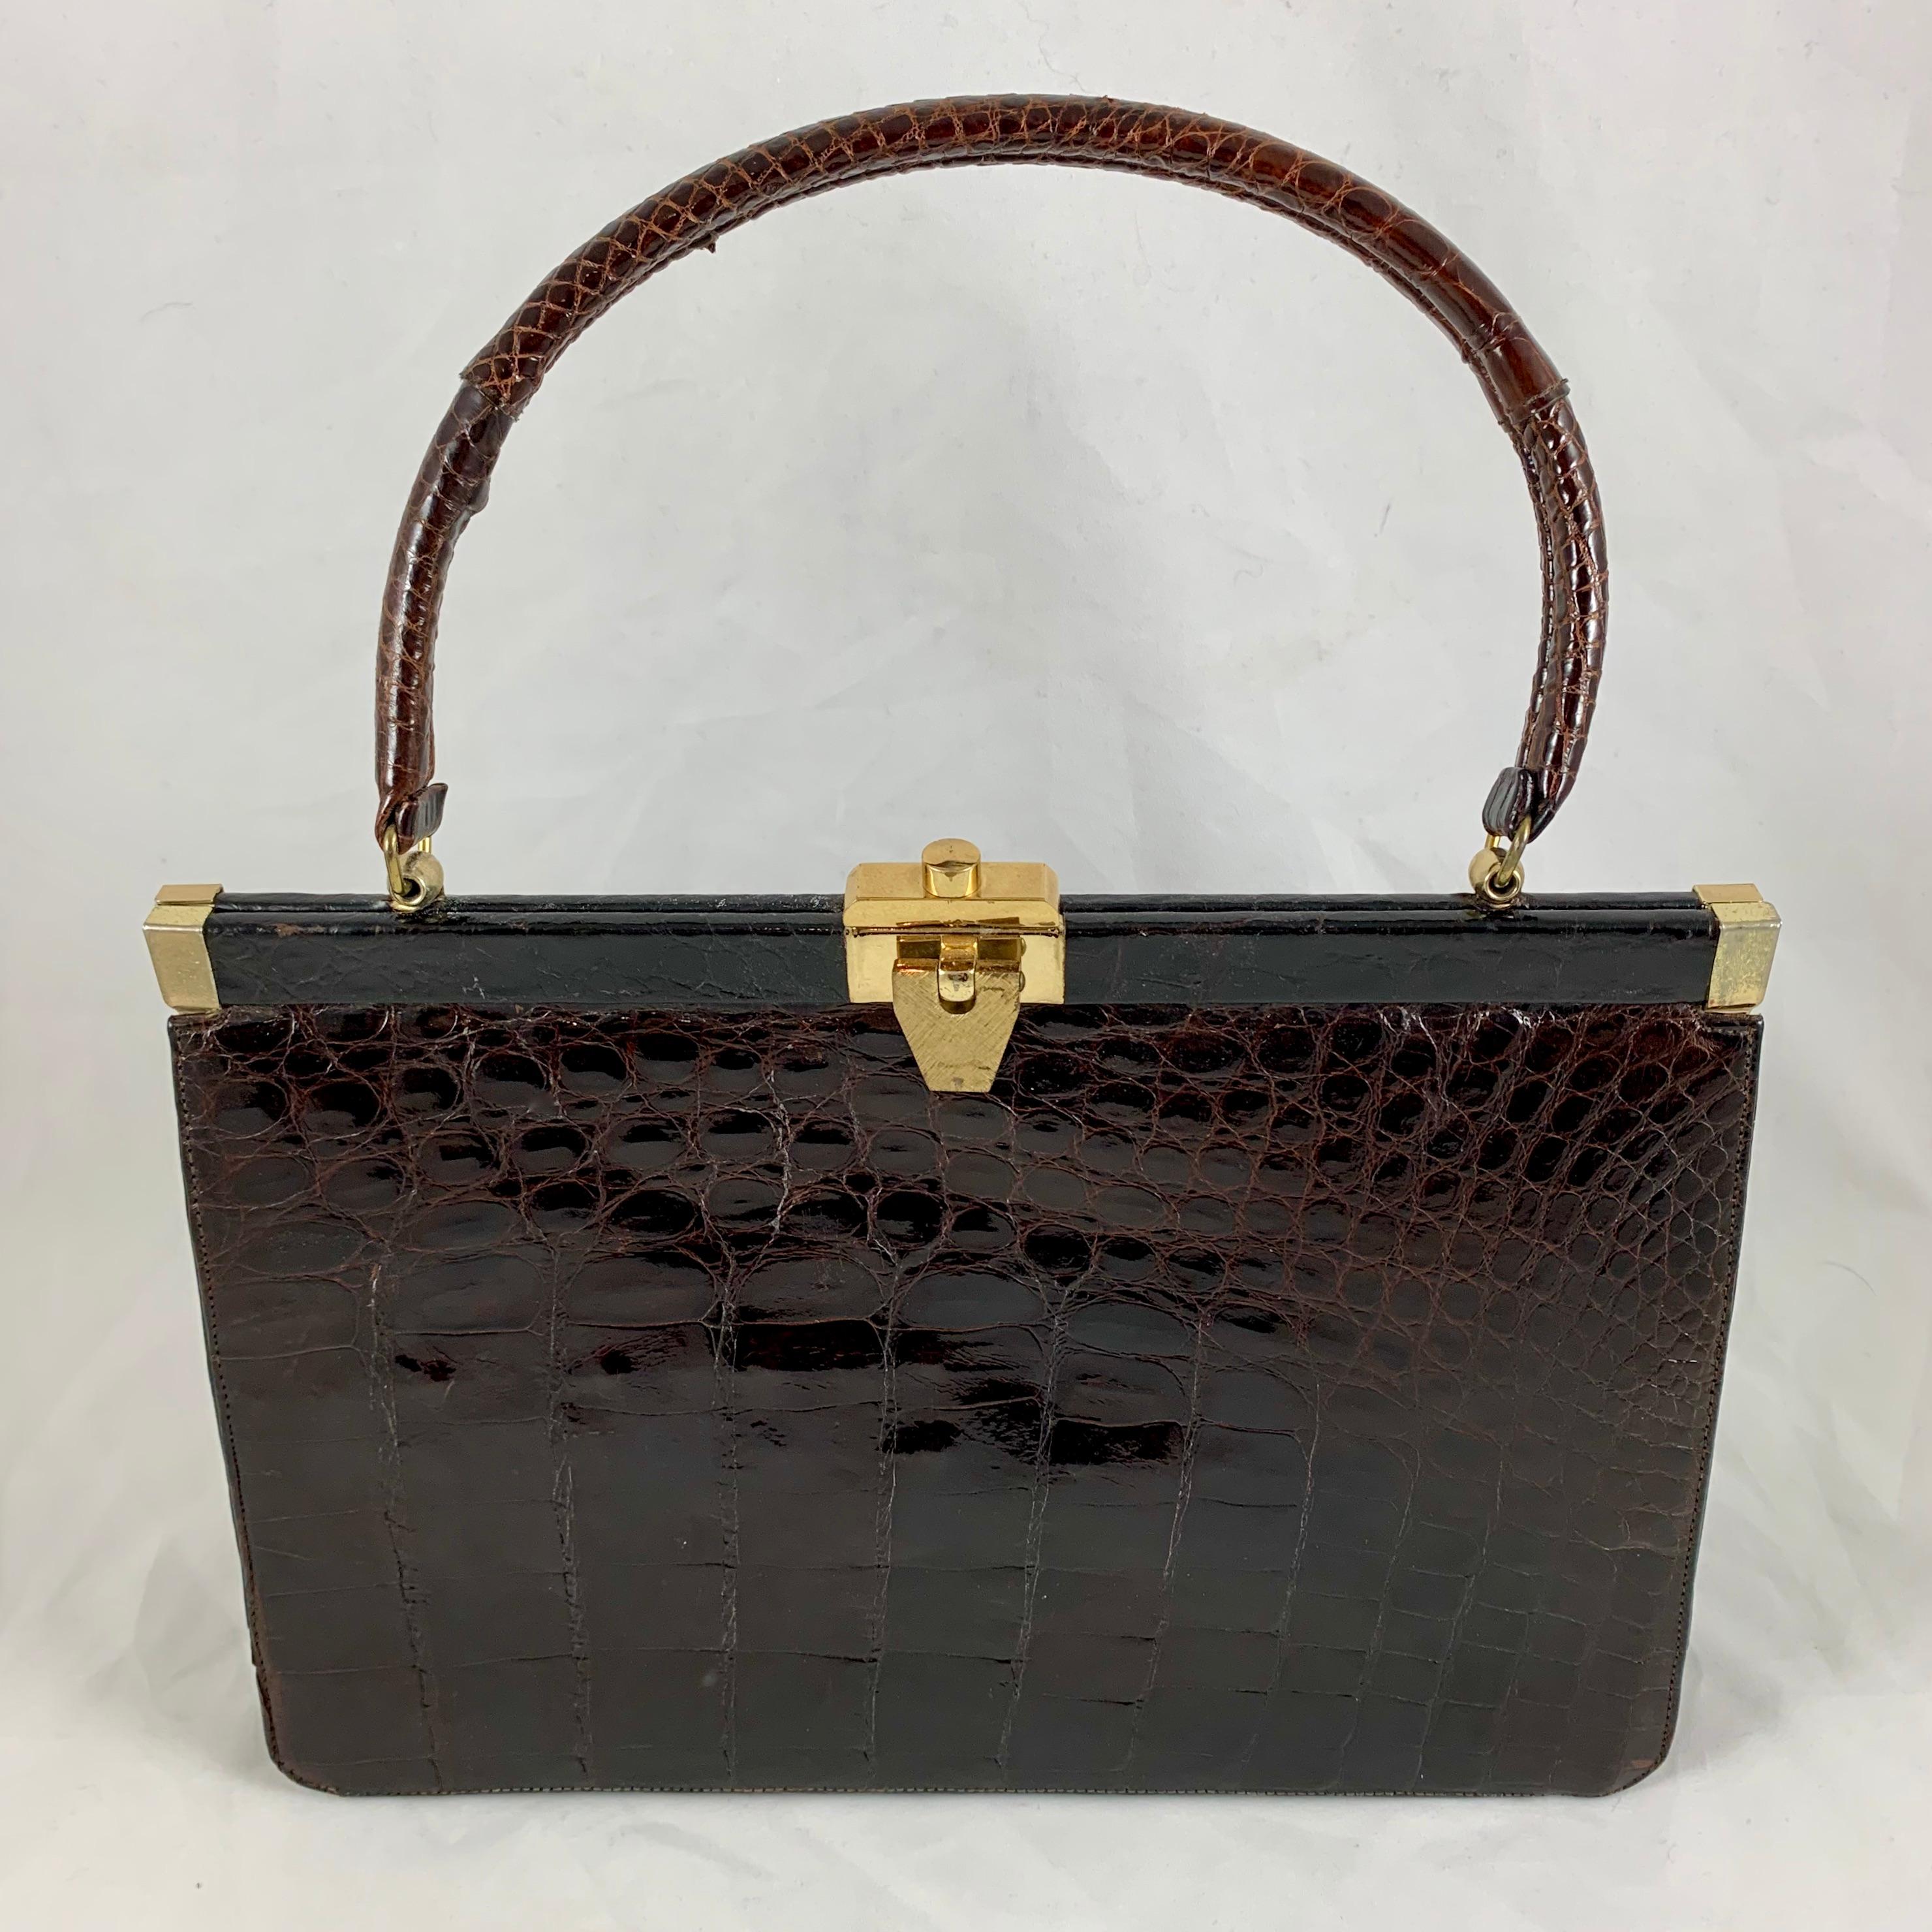 From the mid to late 1950s-early 1960s, a structured, rich brown alligator handbag made by Bellestone Bags, Inc. in New York City. Bellestone bags were sold by Saks Fifth Avenue and Bonwit Teller from the 1940s-1960s. Bellestone was known for their